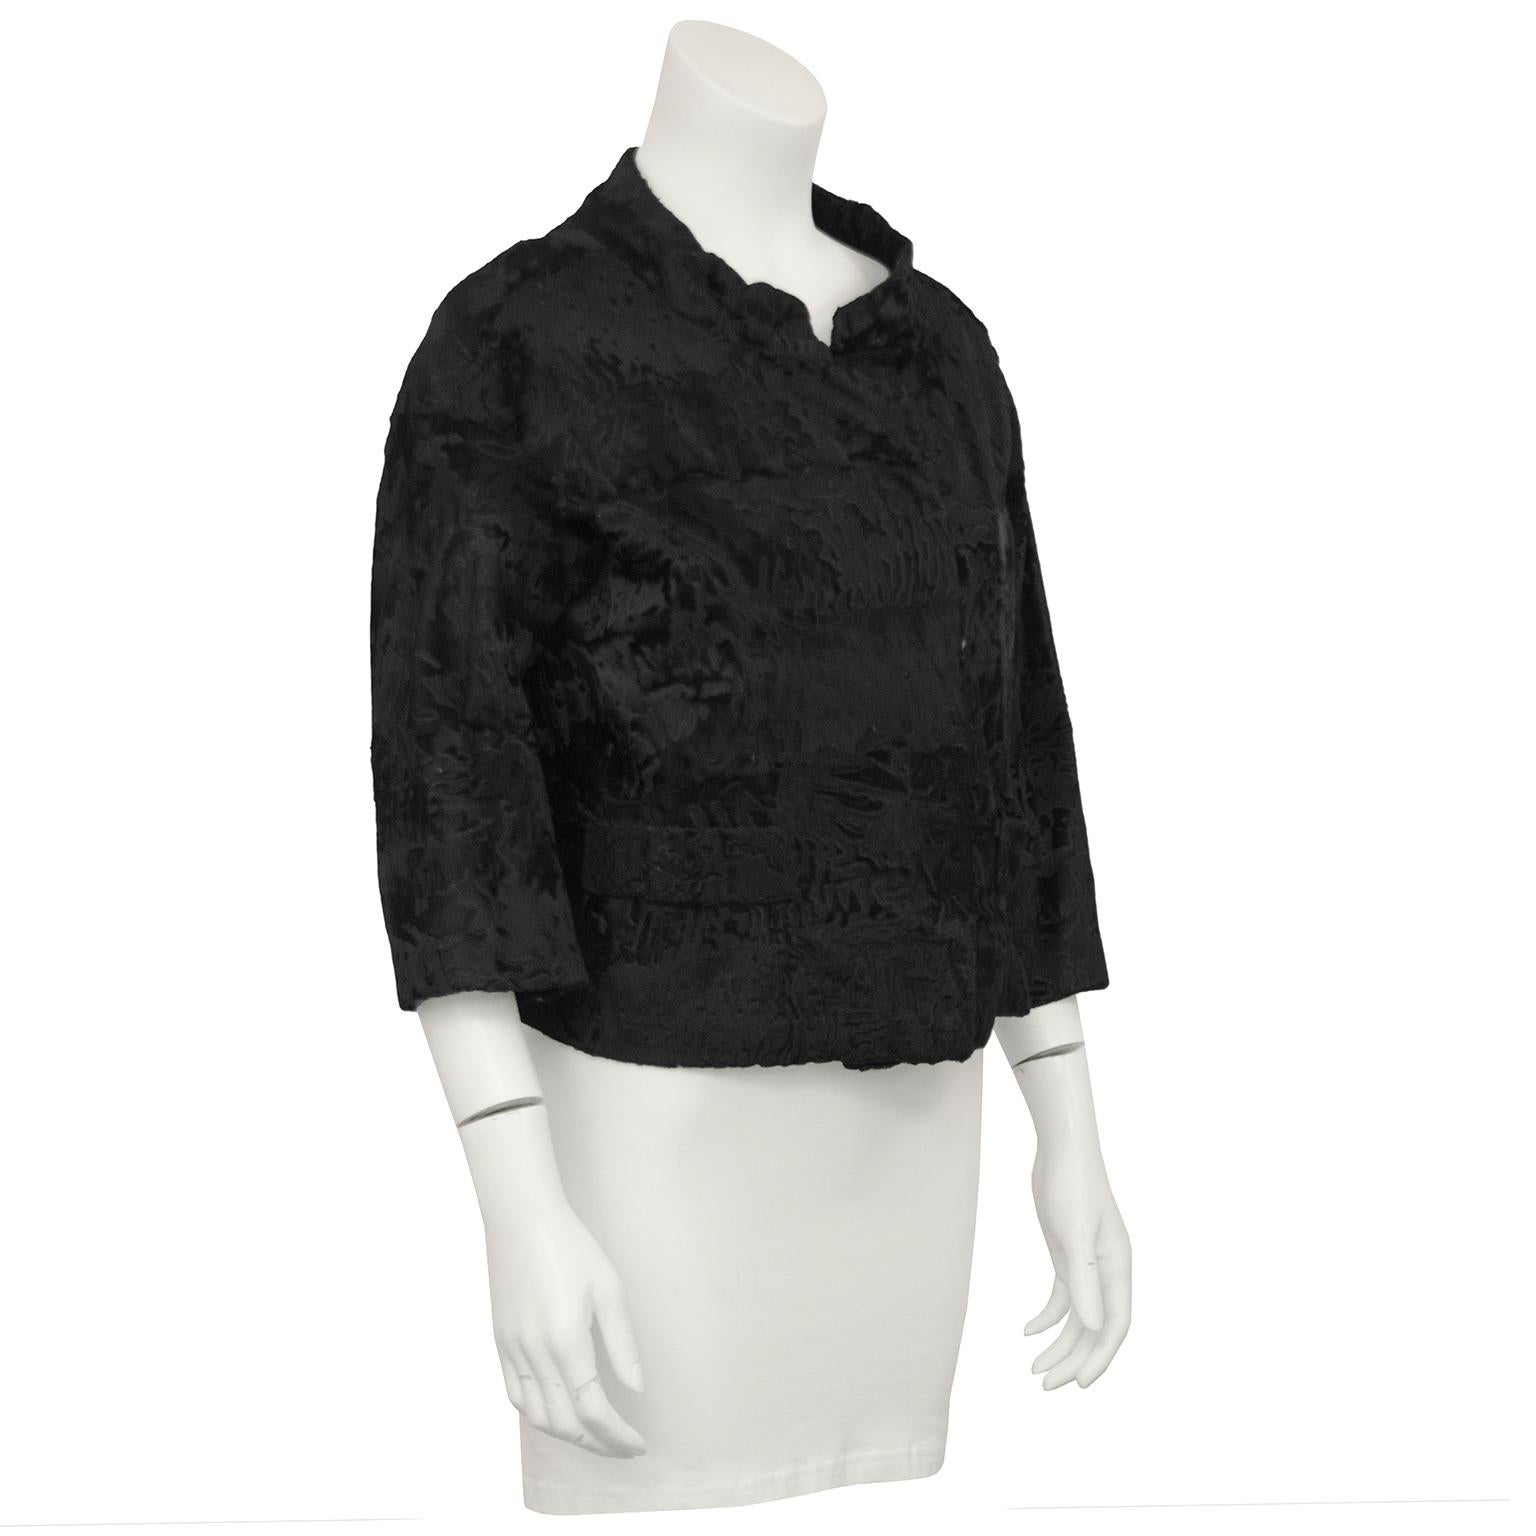 1960's Christian Dior Original for Holt Renfrew Canada black broadtail cropped jacket. High Mandarin style collar with overlapping hook closure and faux pocket patches on the front. Bracelet length sleeves.  Moderate wear to the edges of the sleeves